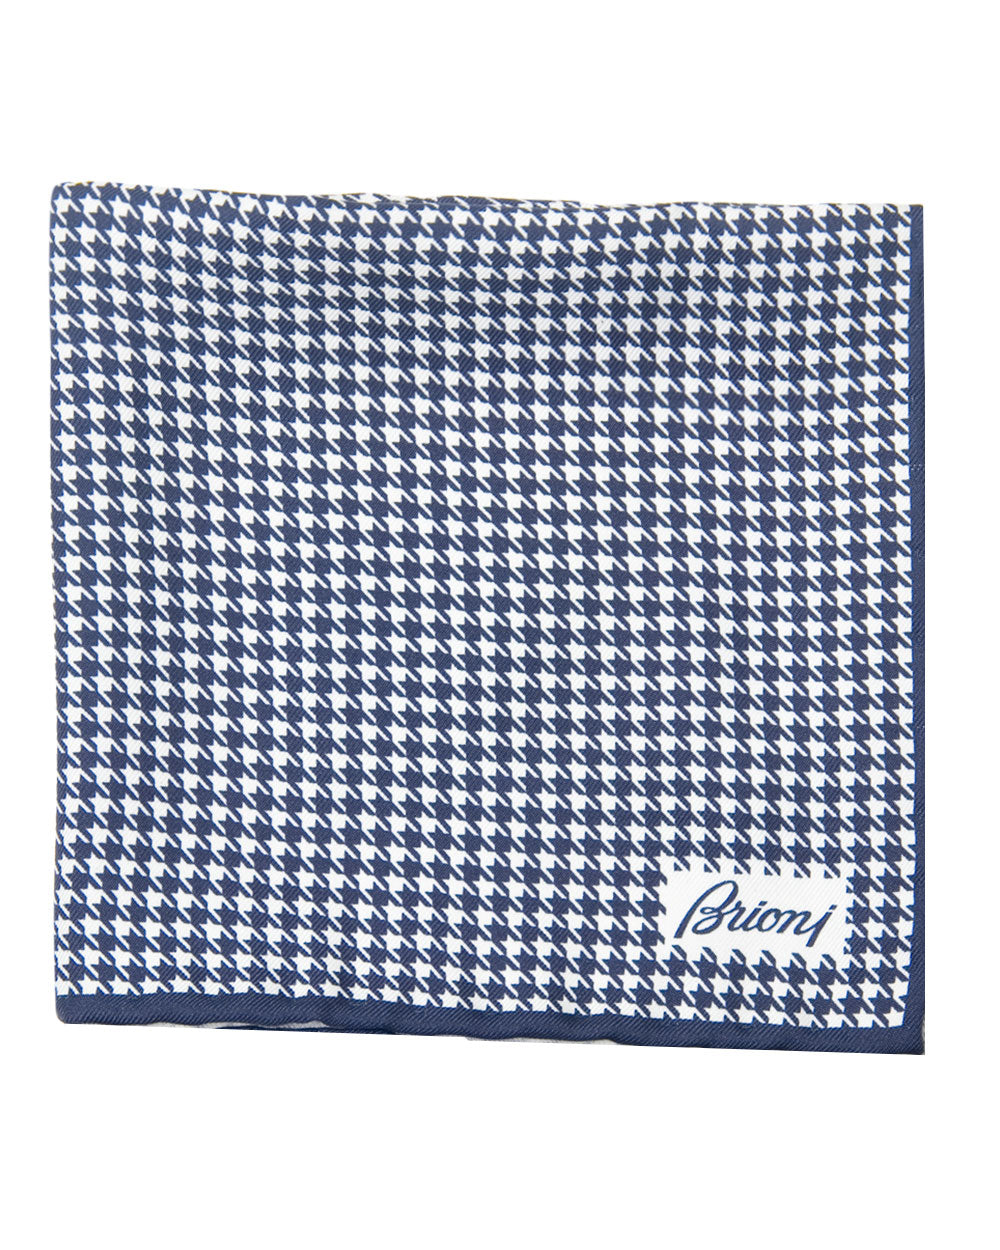 Navy and White Houndstooth Pocket Square